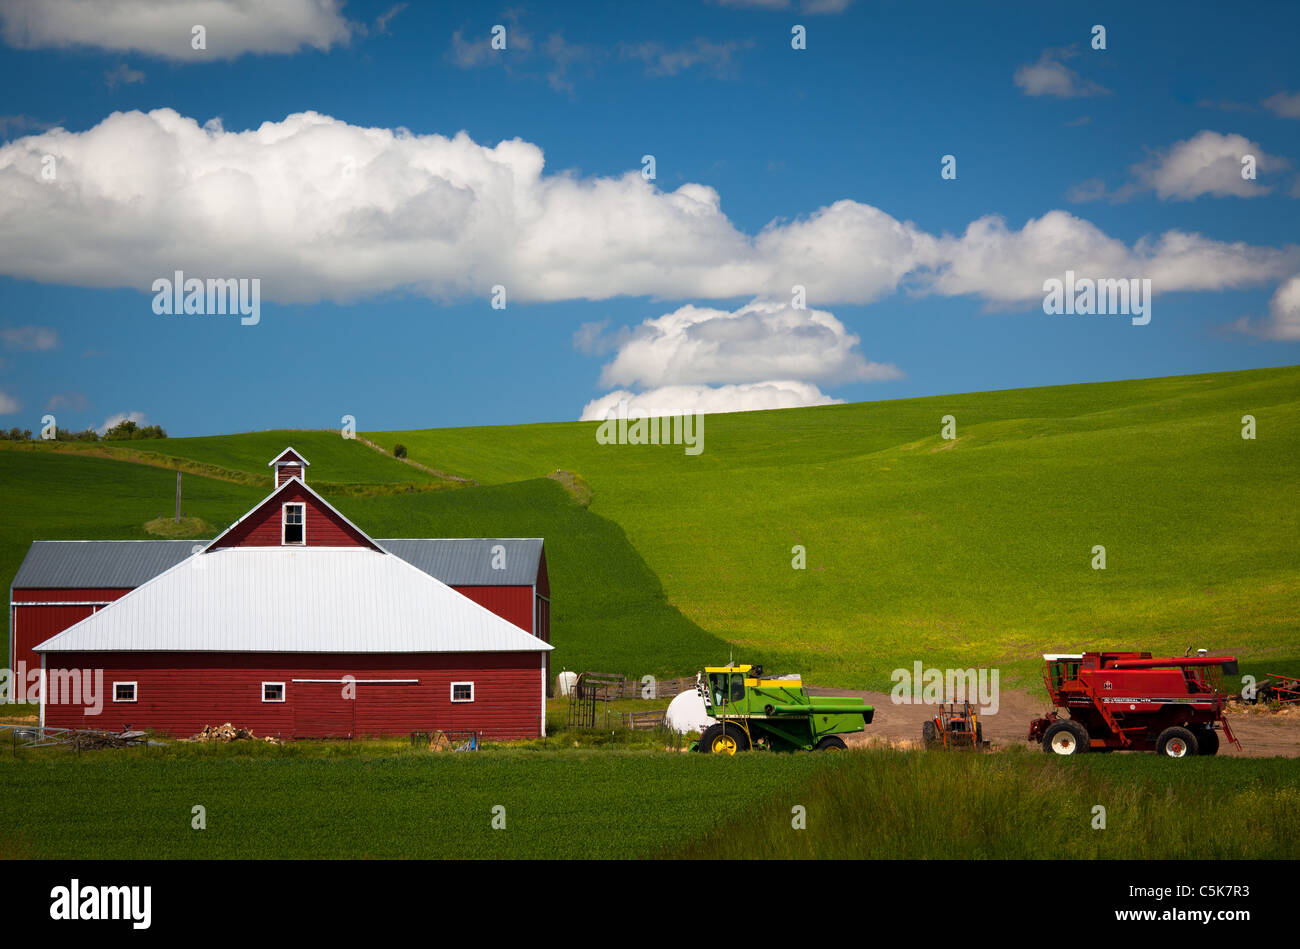 Farm building and machinery in the agricultural Palouse area of eastern Washington state. Stock Photo